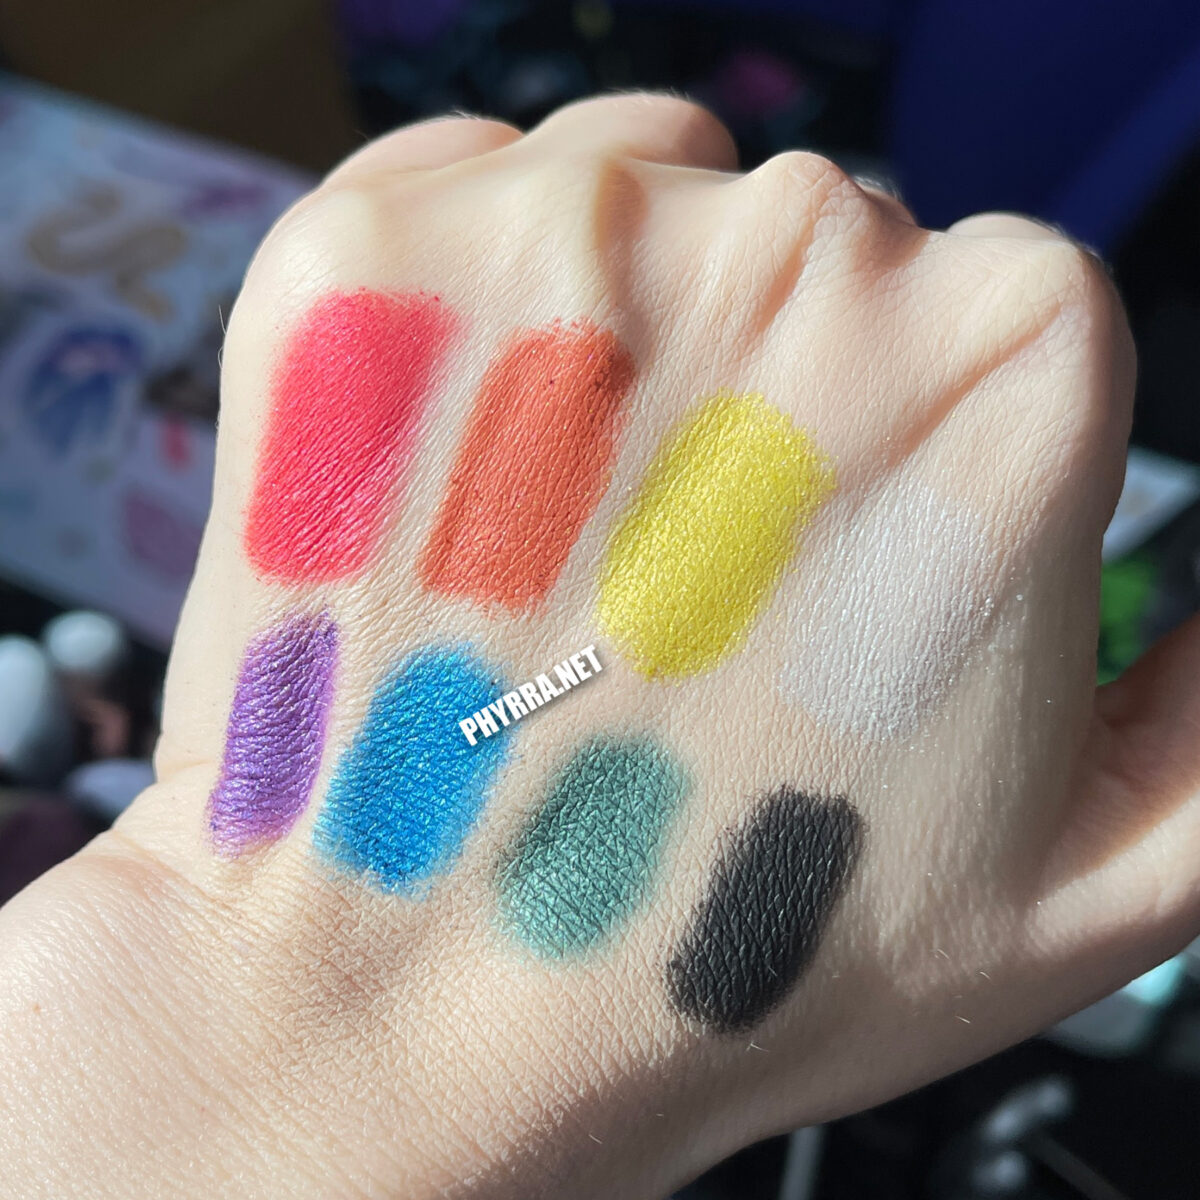 Glam Goth Beauty 7 Deadly Sins Palette swatches on light skin